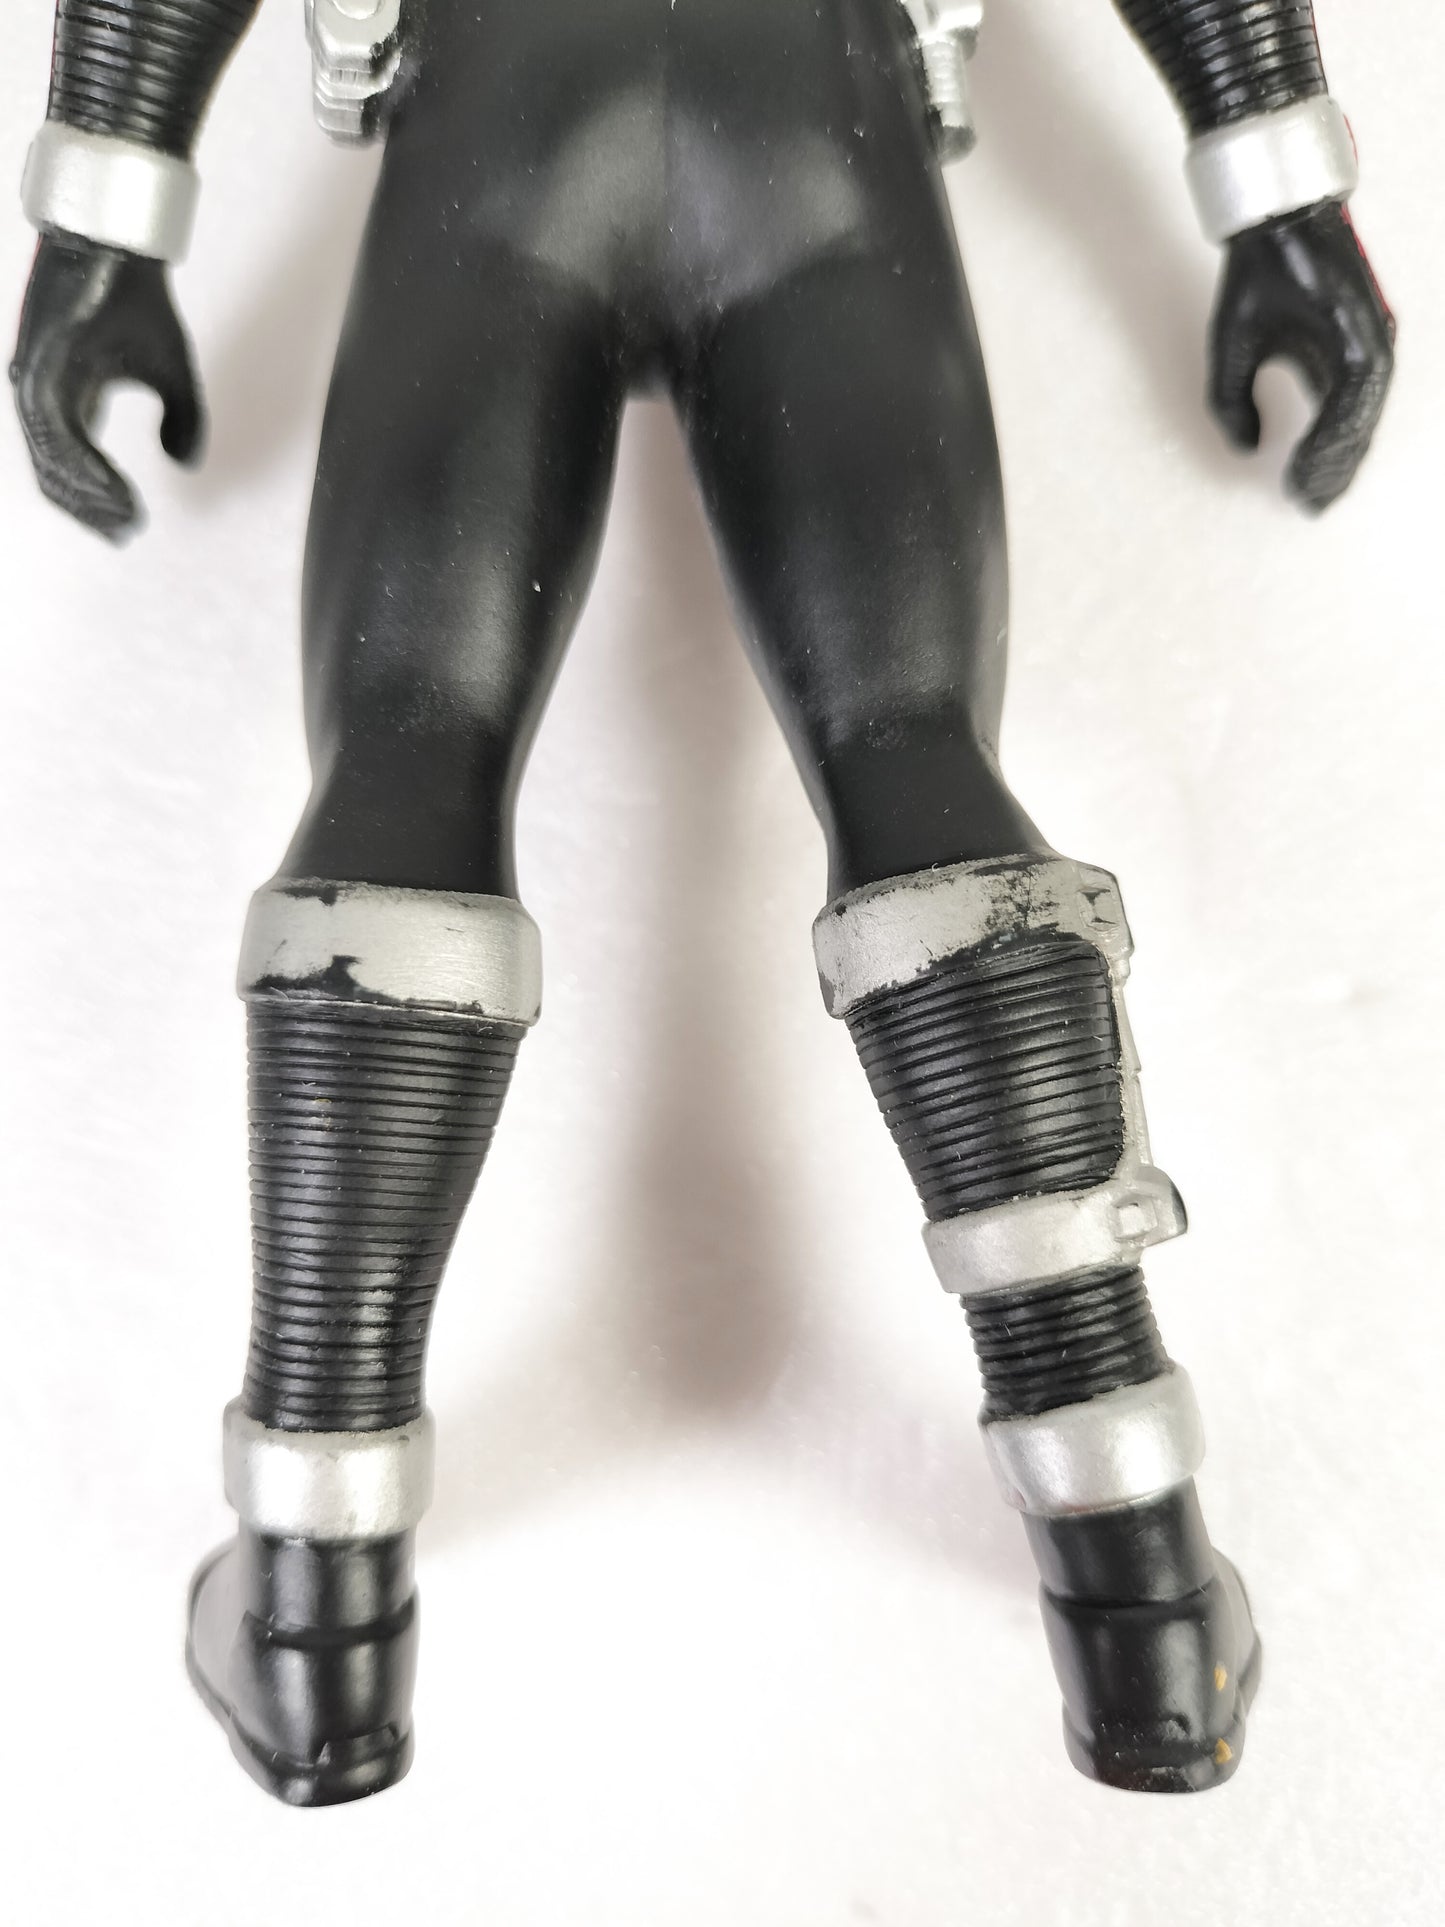 Kamen Rider 555 Mask Rider 555 Made in China Height about 17.5cm Manufactured in 2002 Sofvi Figure retro vintage major scratches and dirt